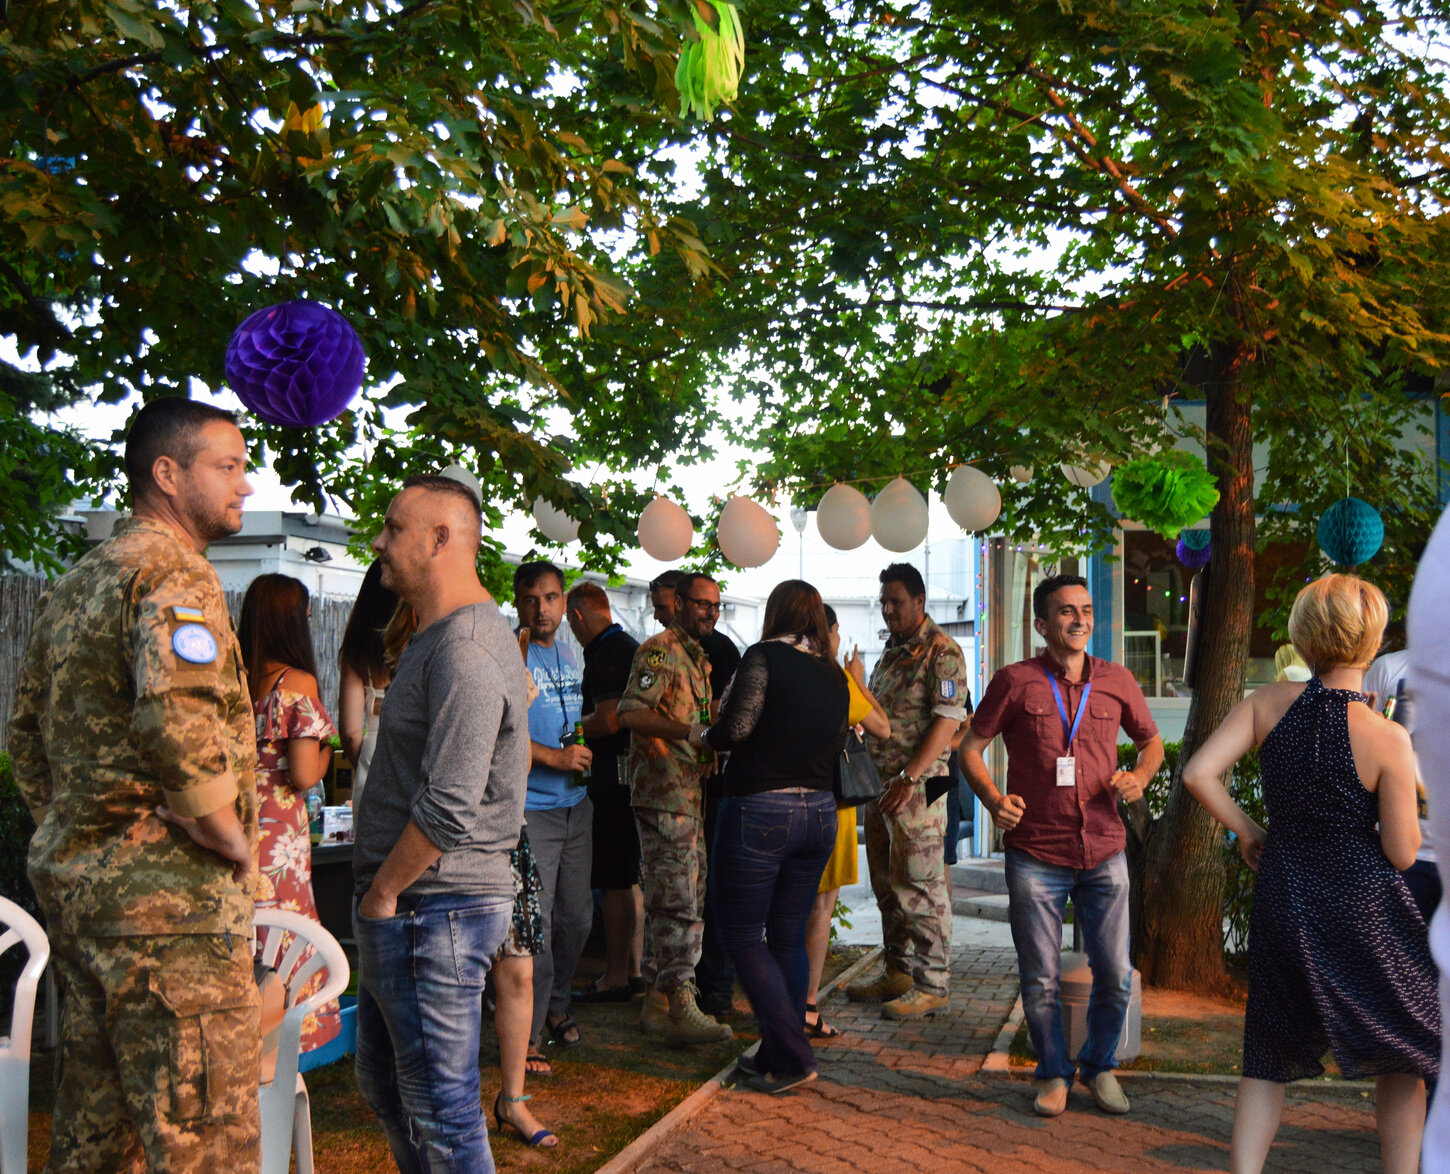 U.N. peacekeepers and mission staff dance at a midsummer’s garden party in the lawn of the U.N. compound in South Mitrovica.